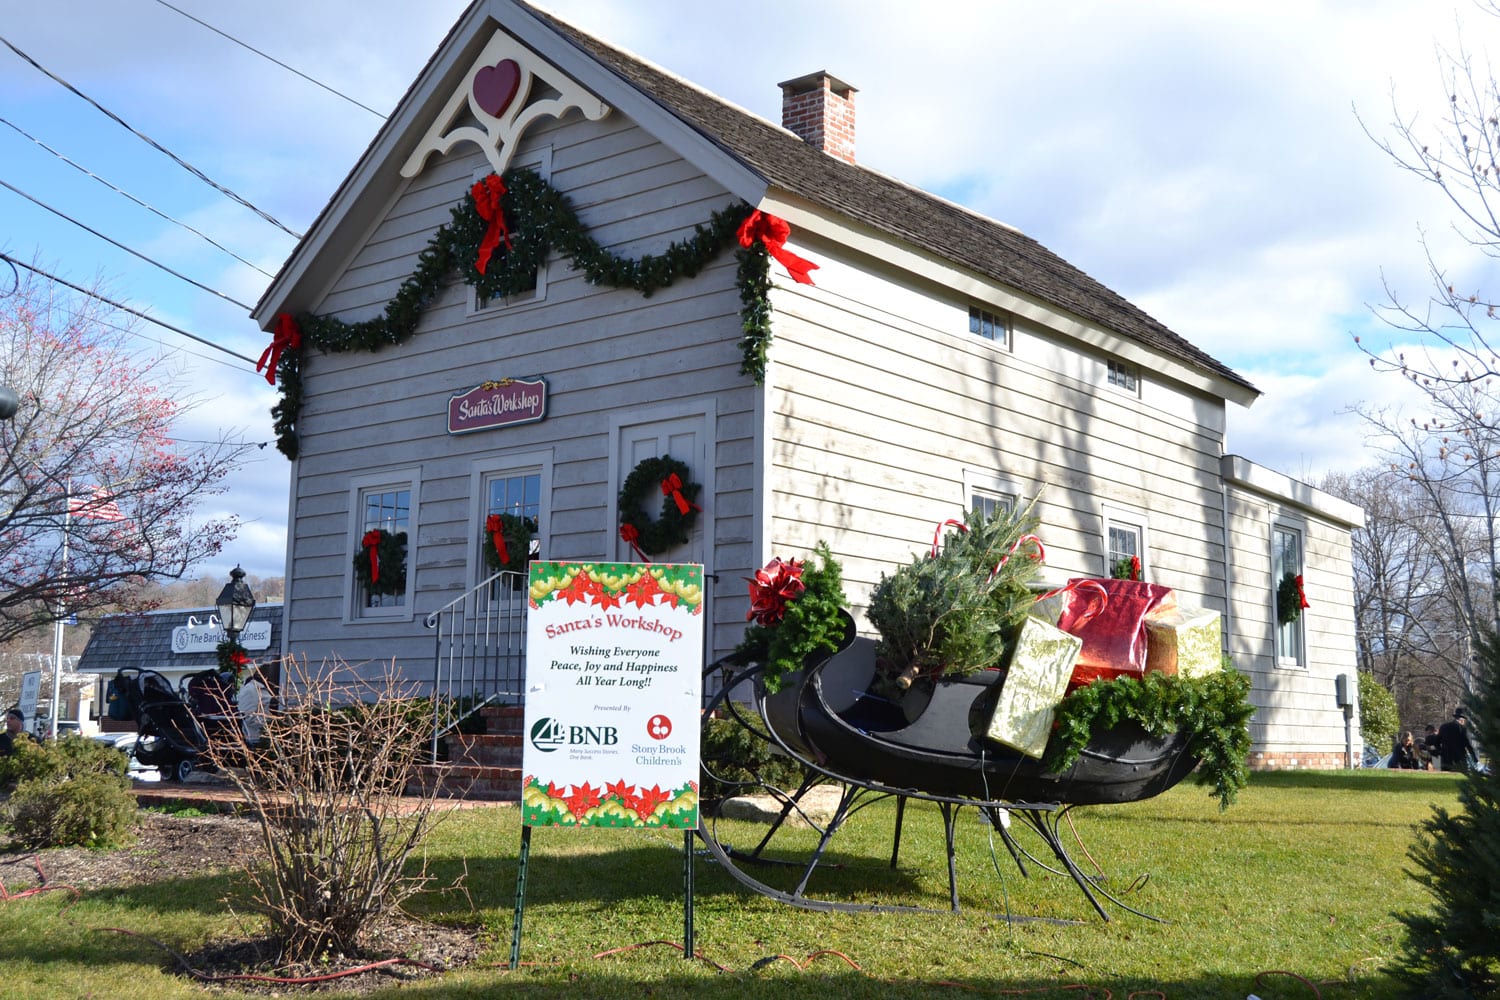 Annual Dickens Festival spreads holiday cheer in Port Jeff TBR News Media